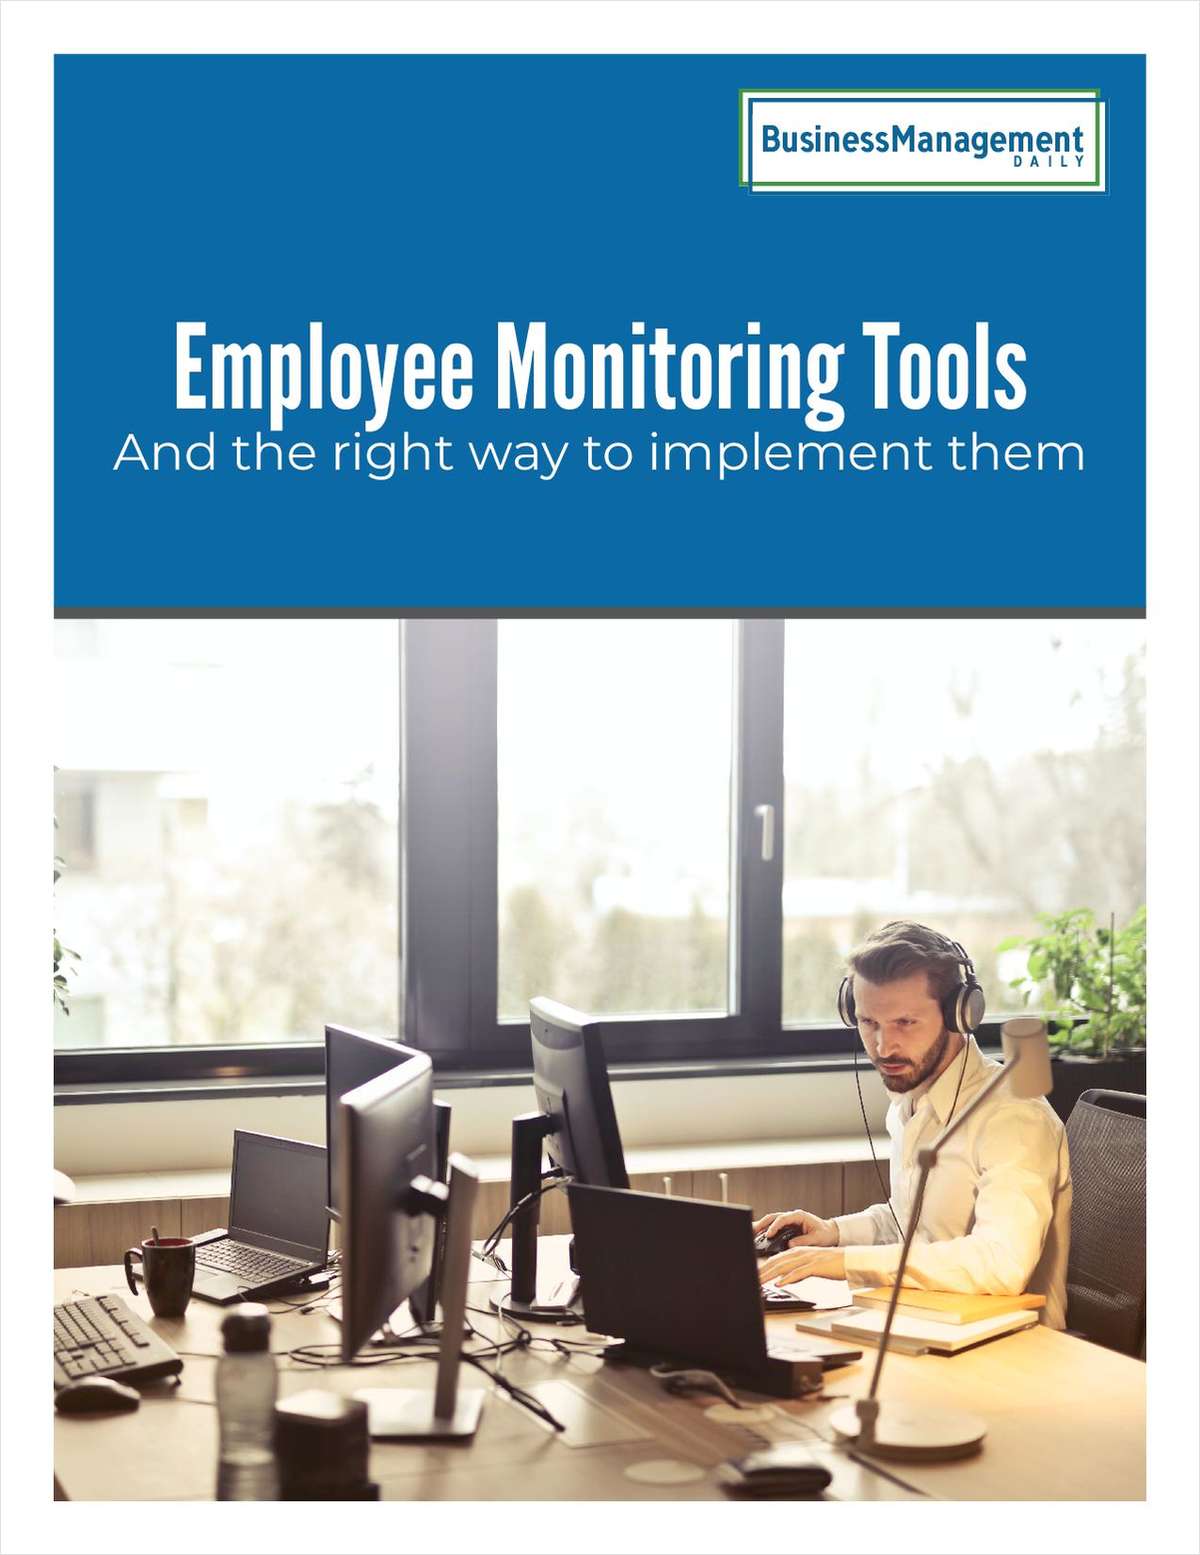 Employee Monitoring Tools: And the right way to implement them